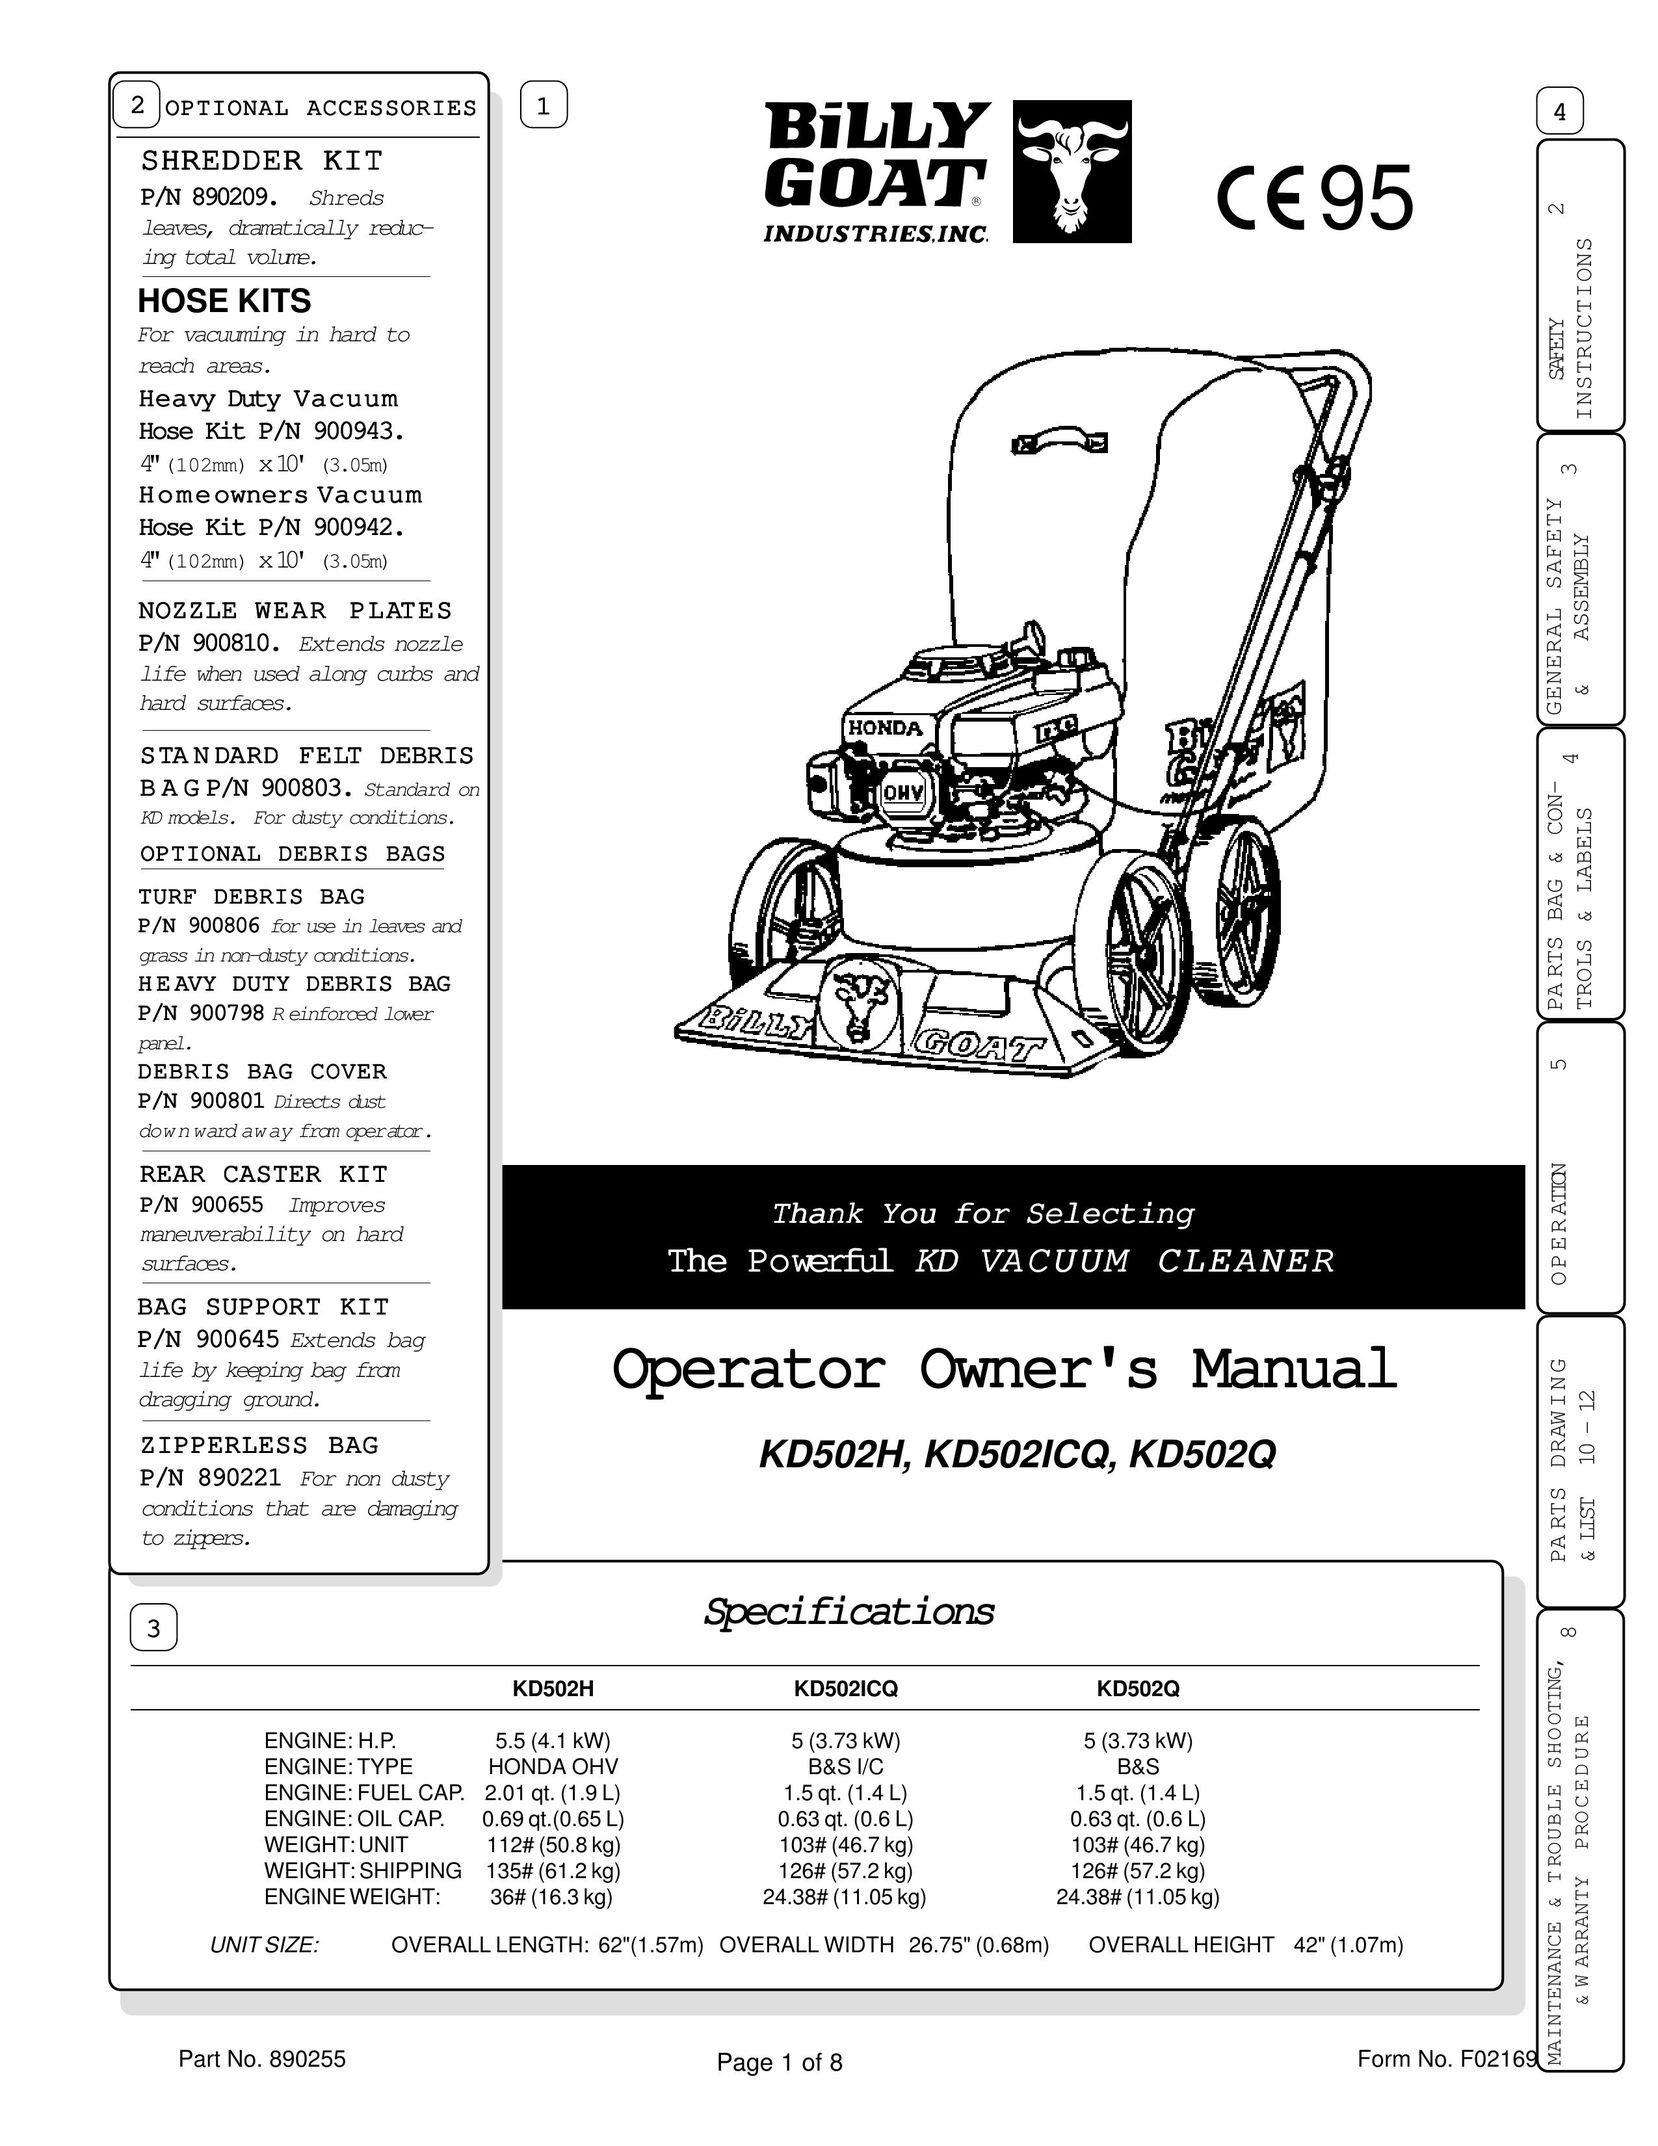 Billy Goat KD502ICQ Vacuum Cleaner User Manual